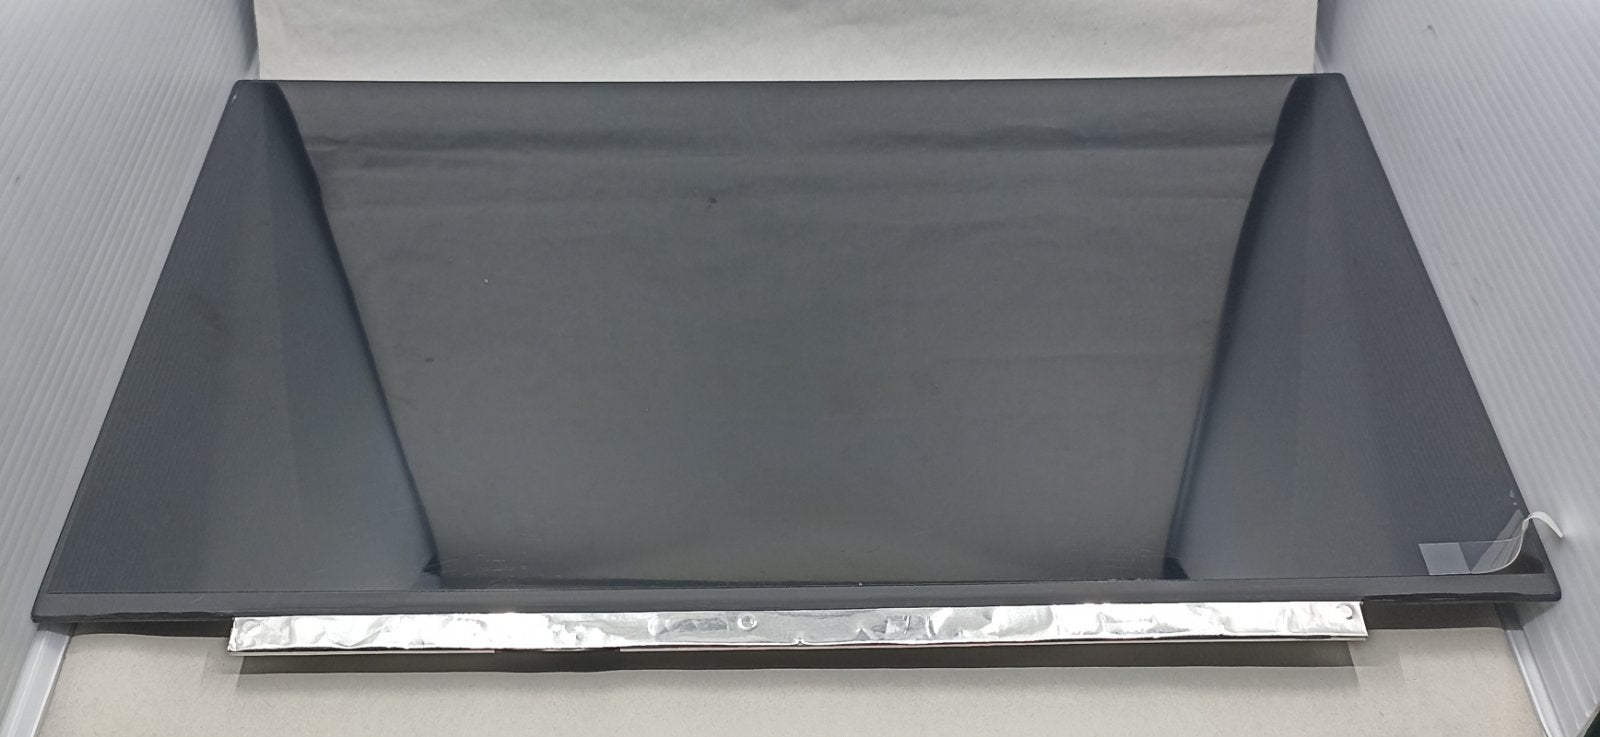 Replacement LCD For Asus GL704GV WL